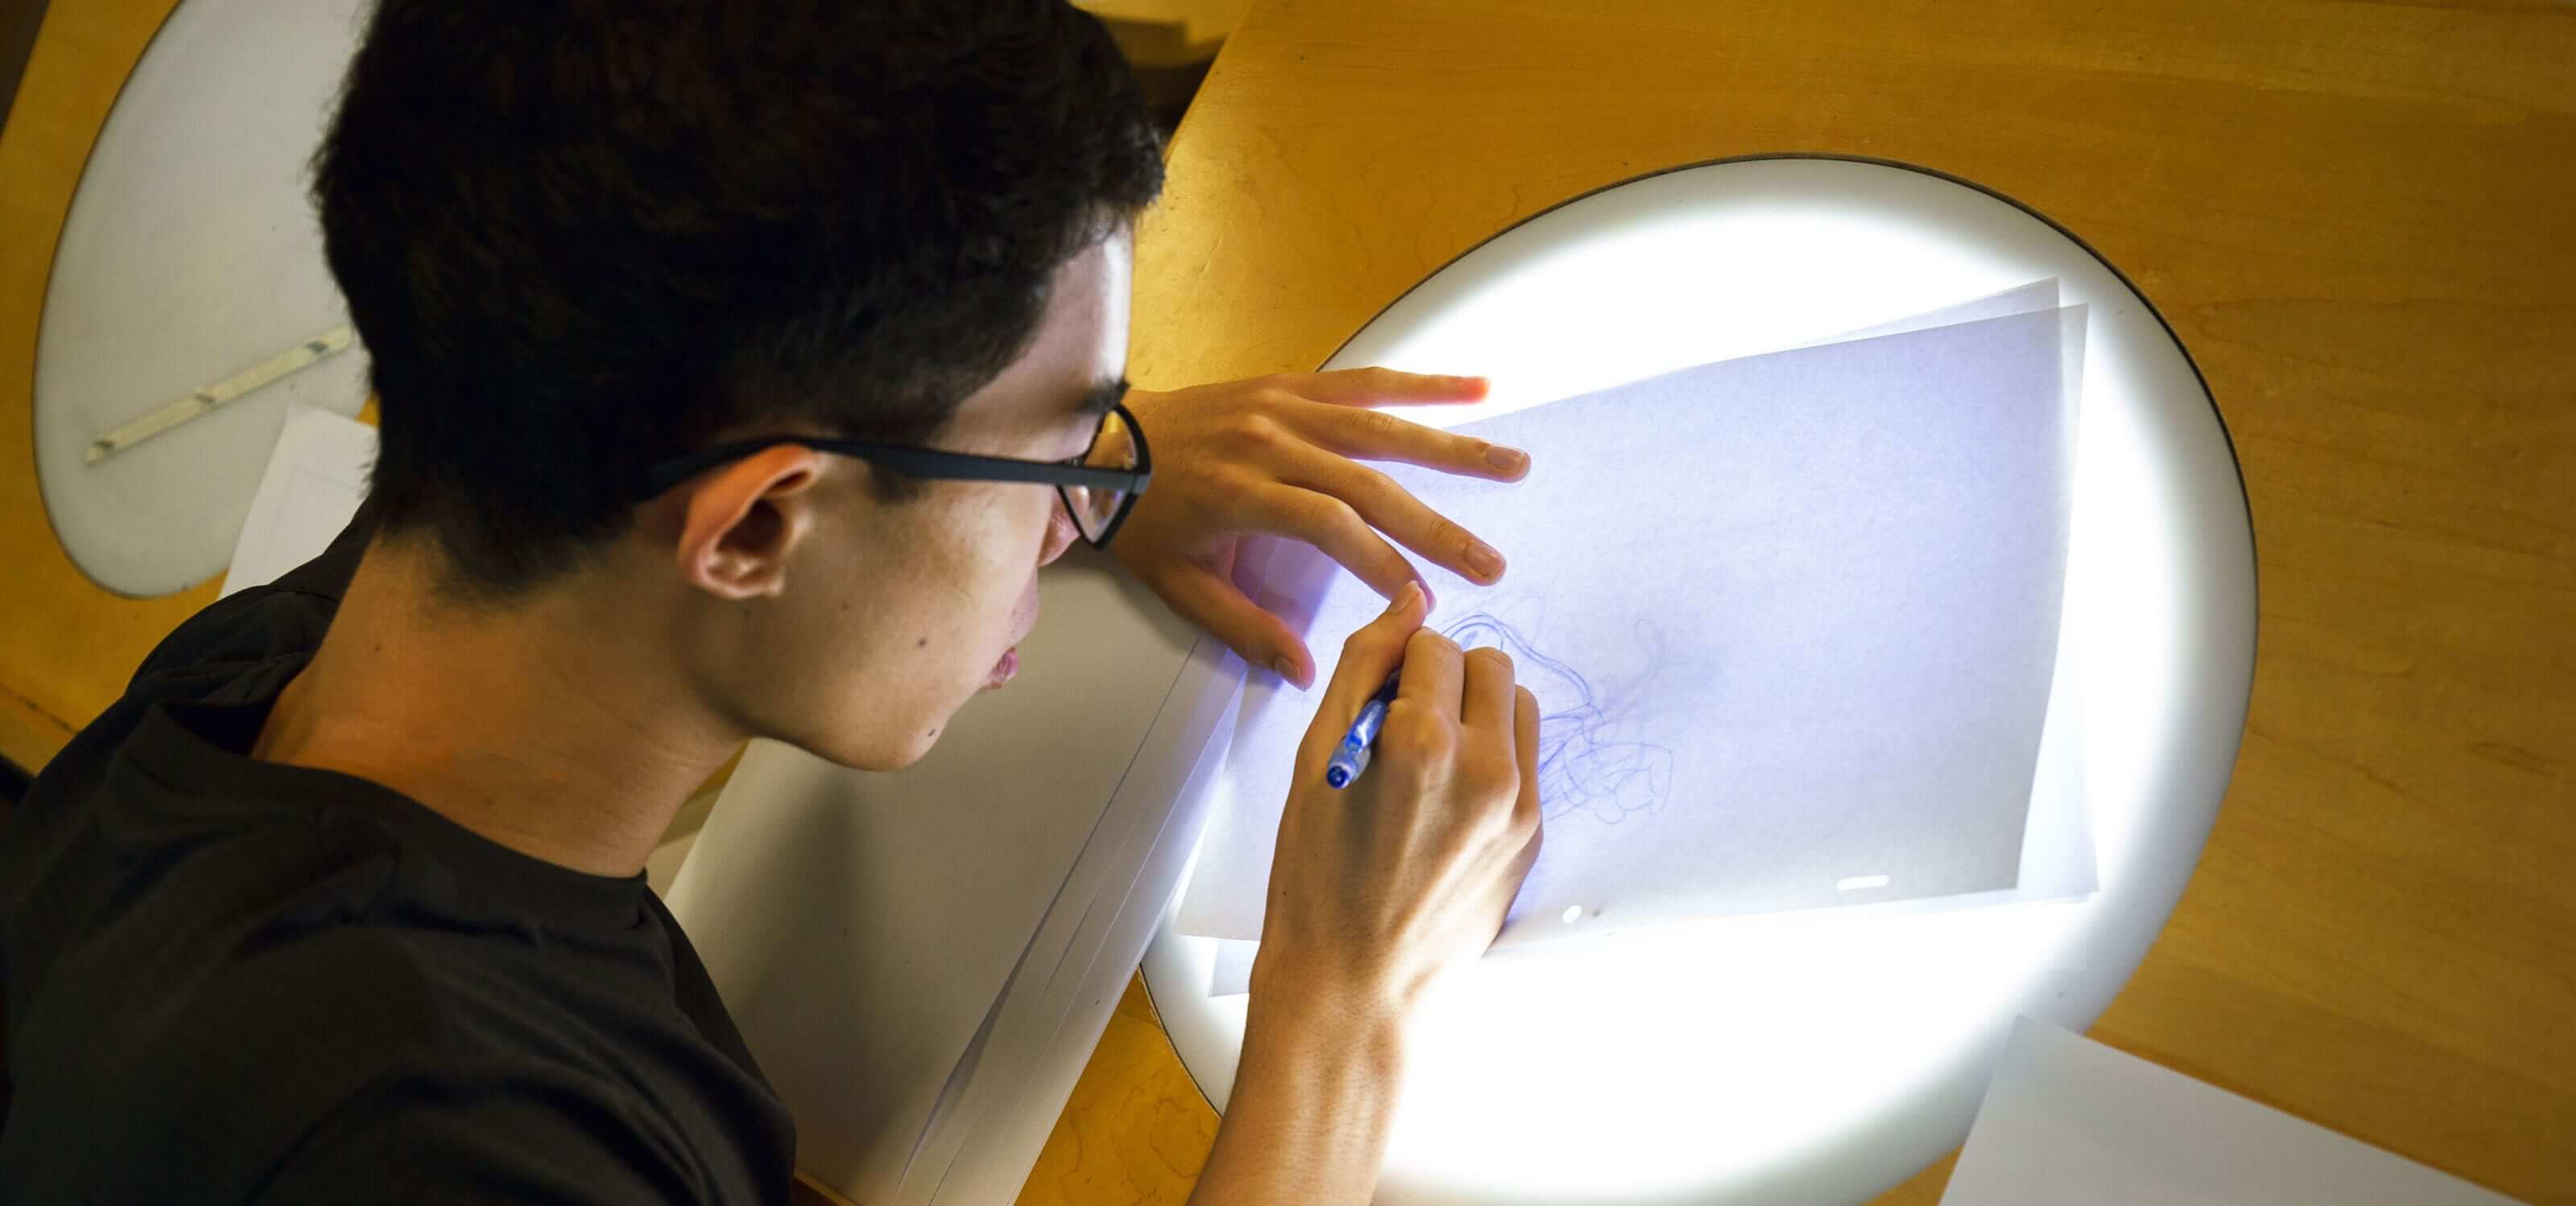 Over-the-shoulder shot of a DigiPen (Singapore) student drawing on an animation lightbox